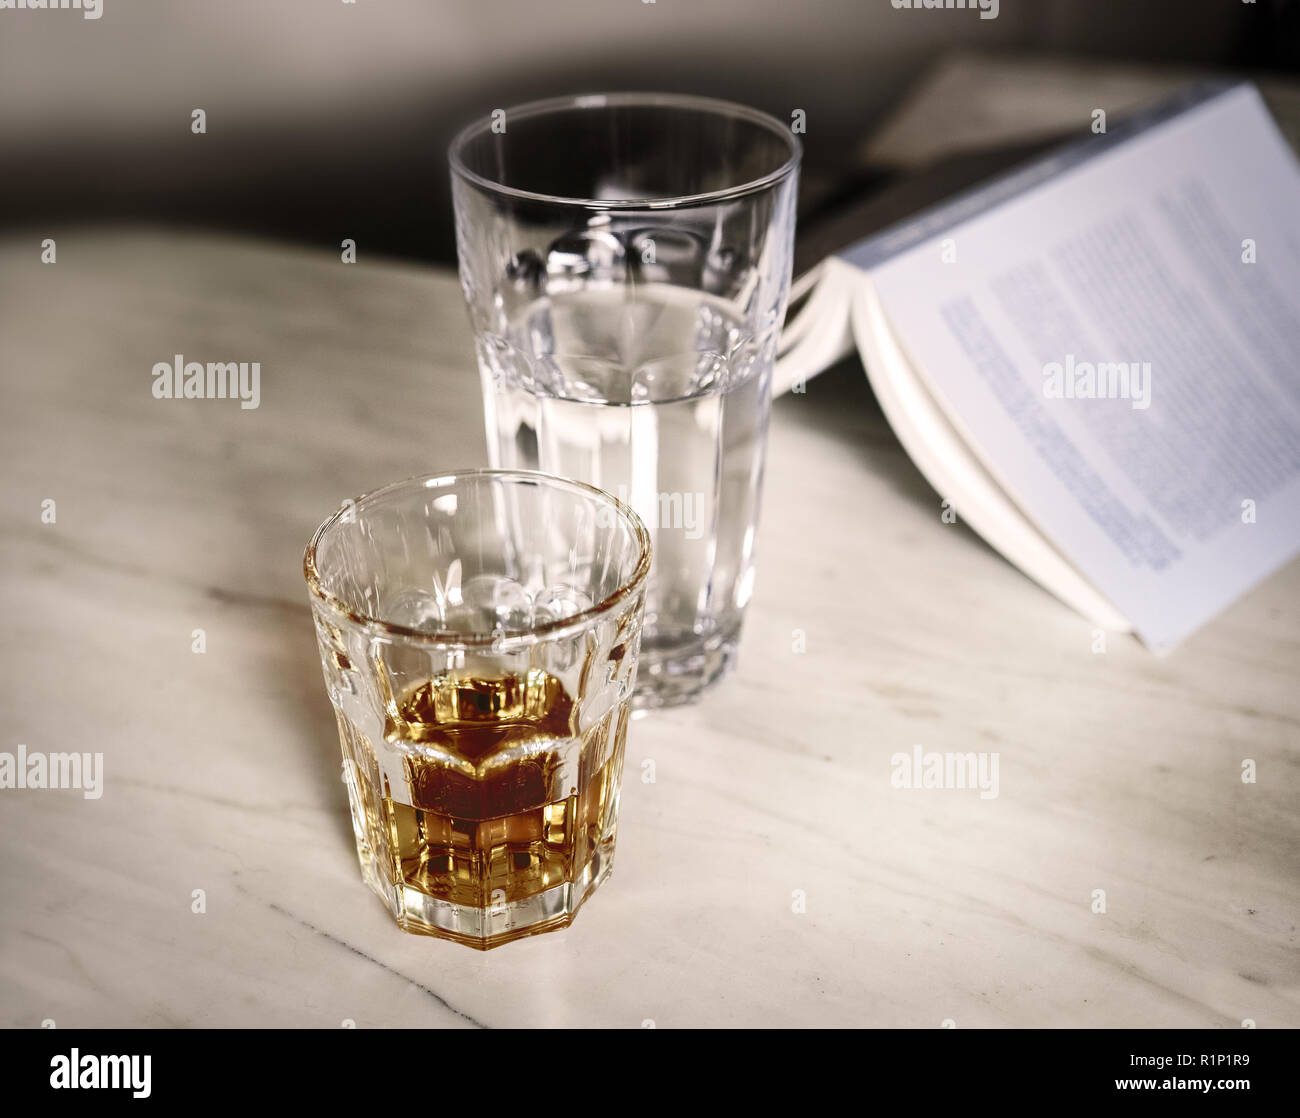 A glass of alcohol, a glass of water and a book, on a marble table. Stock Photo